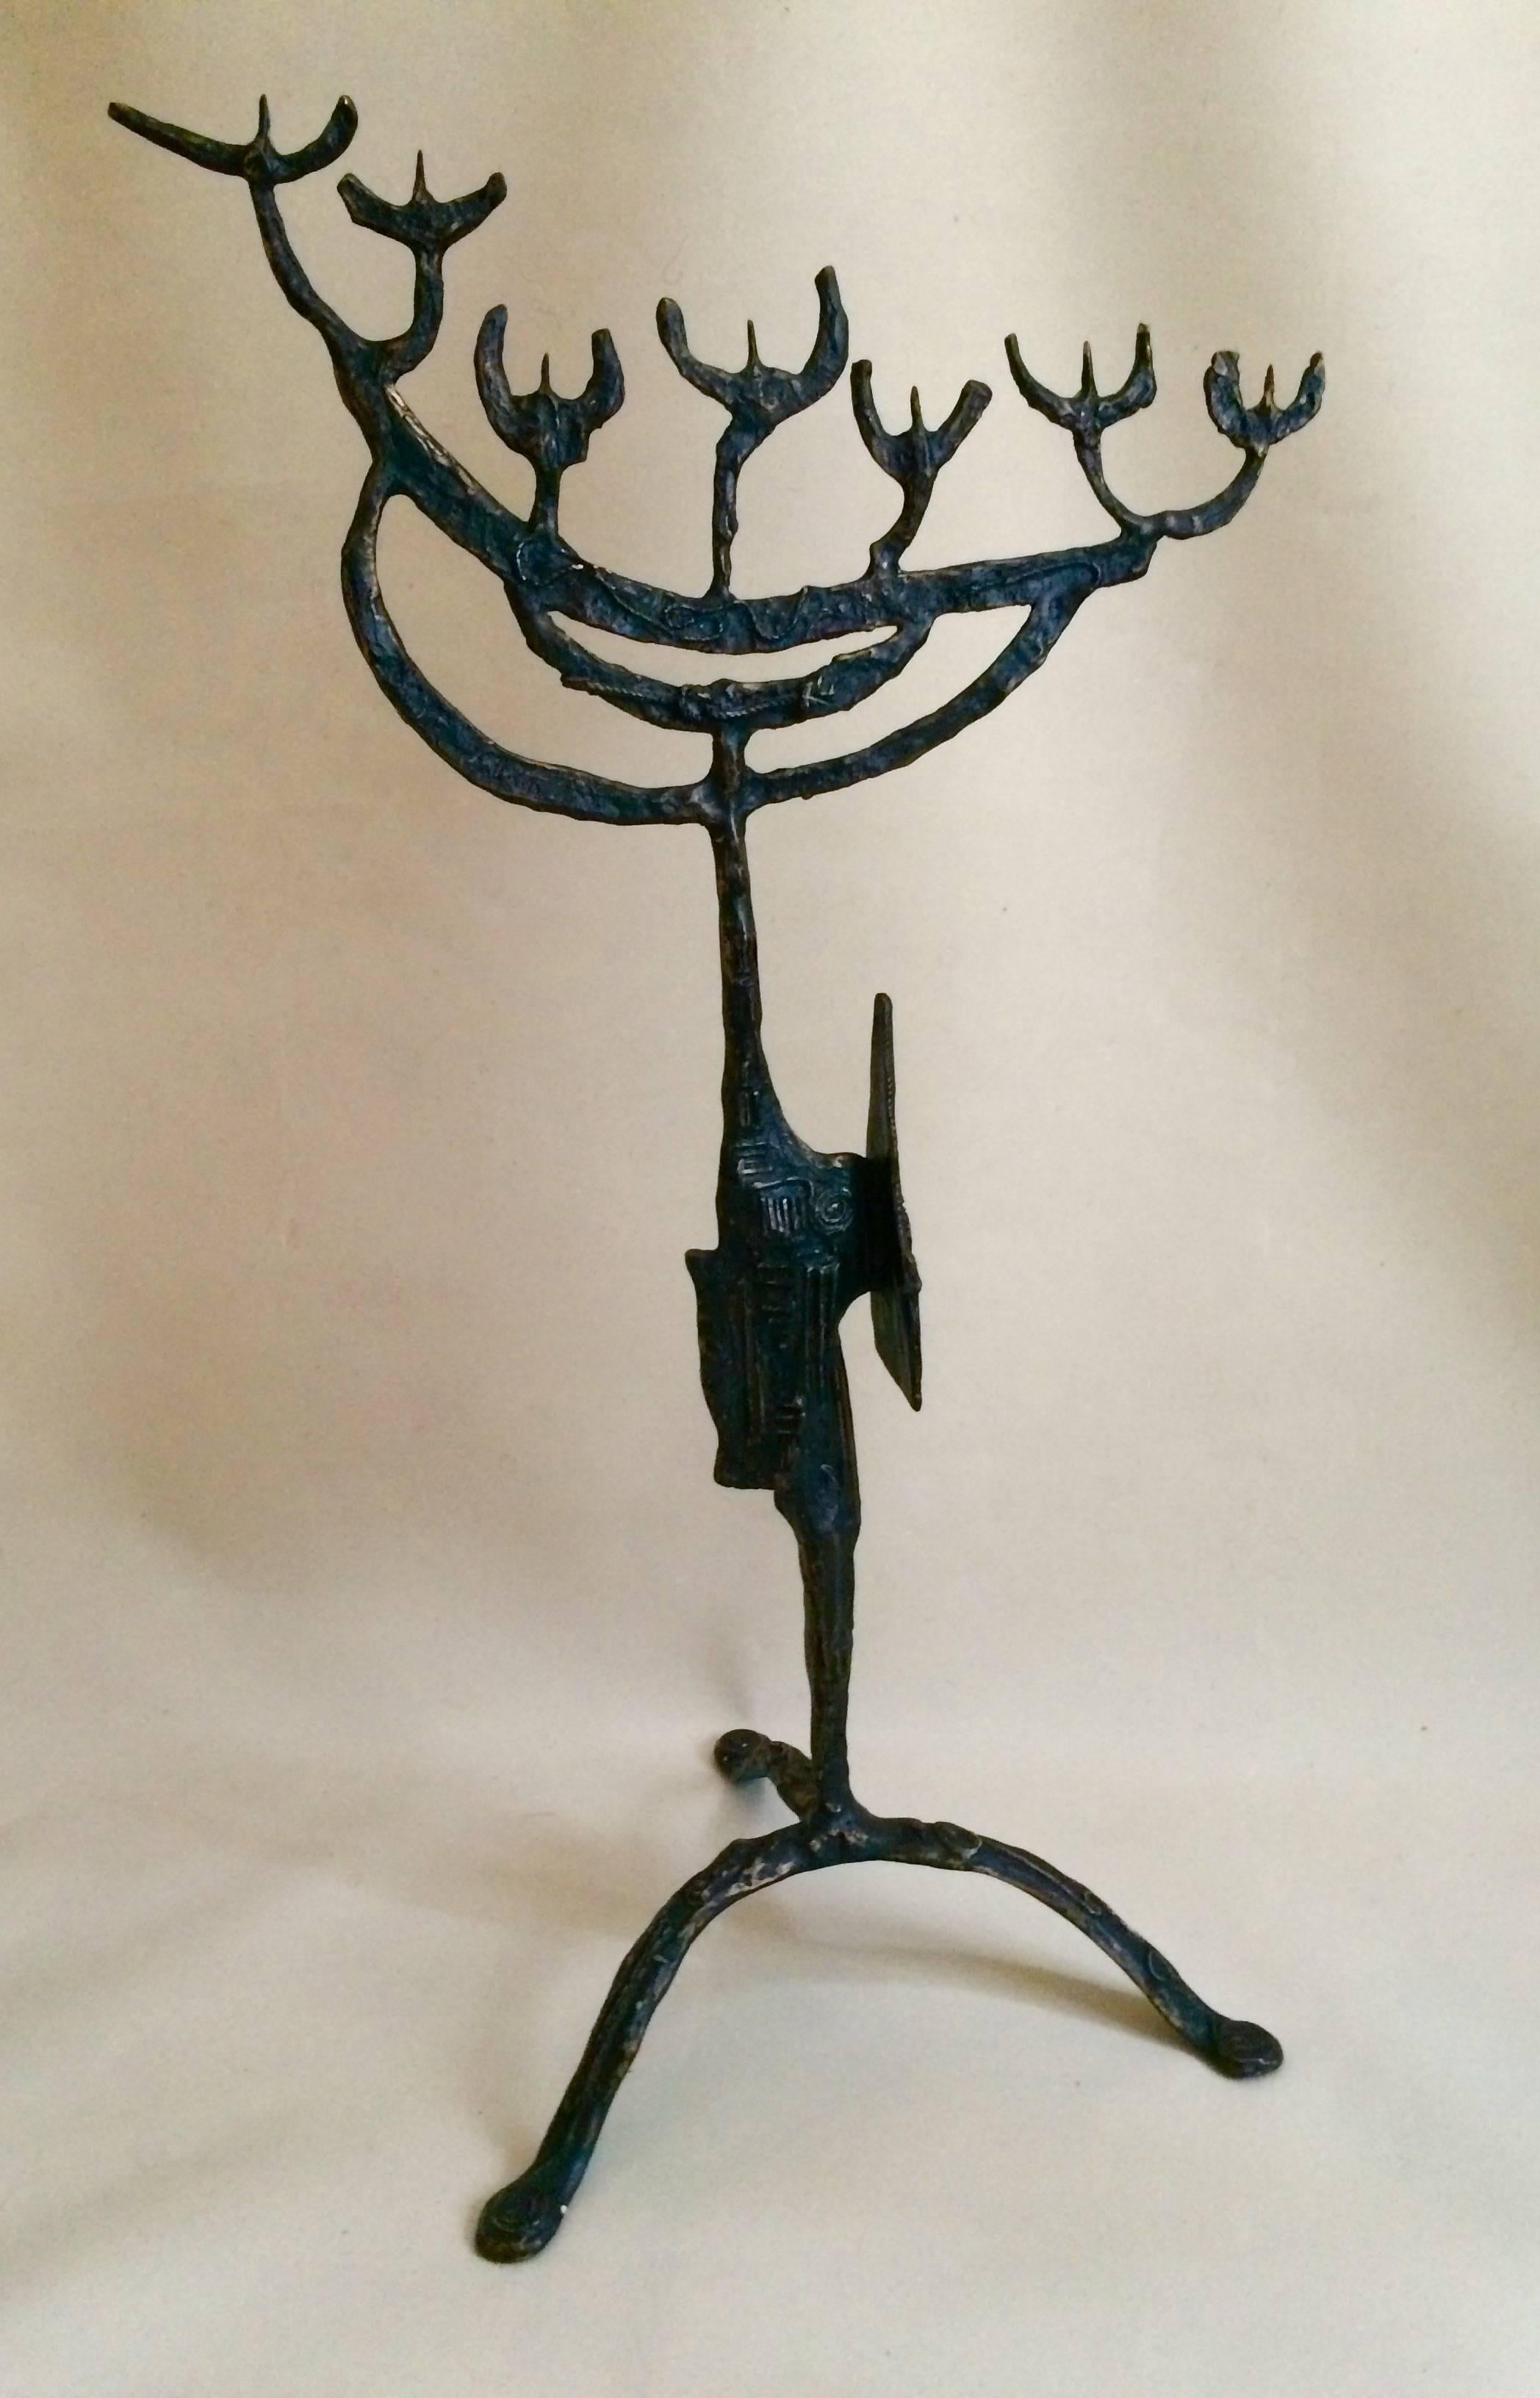 An impressive Mid-Century sculpted bronze menorah, finely engraved and carved with symbols and graphic of Jewish tradition combined with modern Brutalist art, quite sensational.

